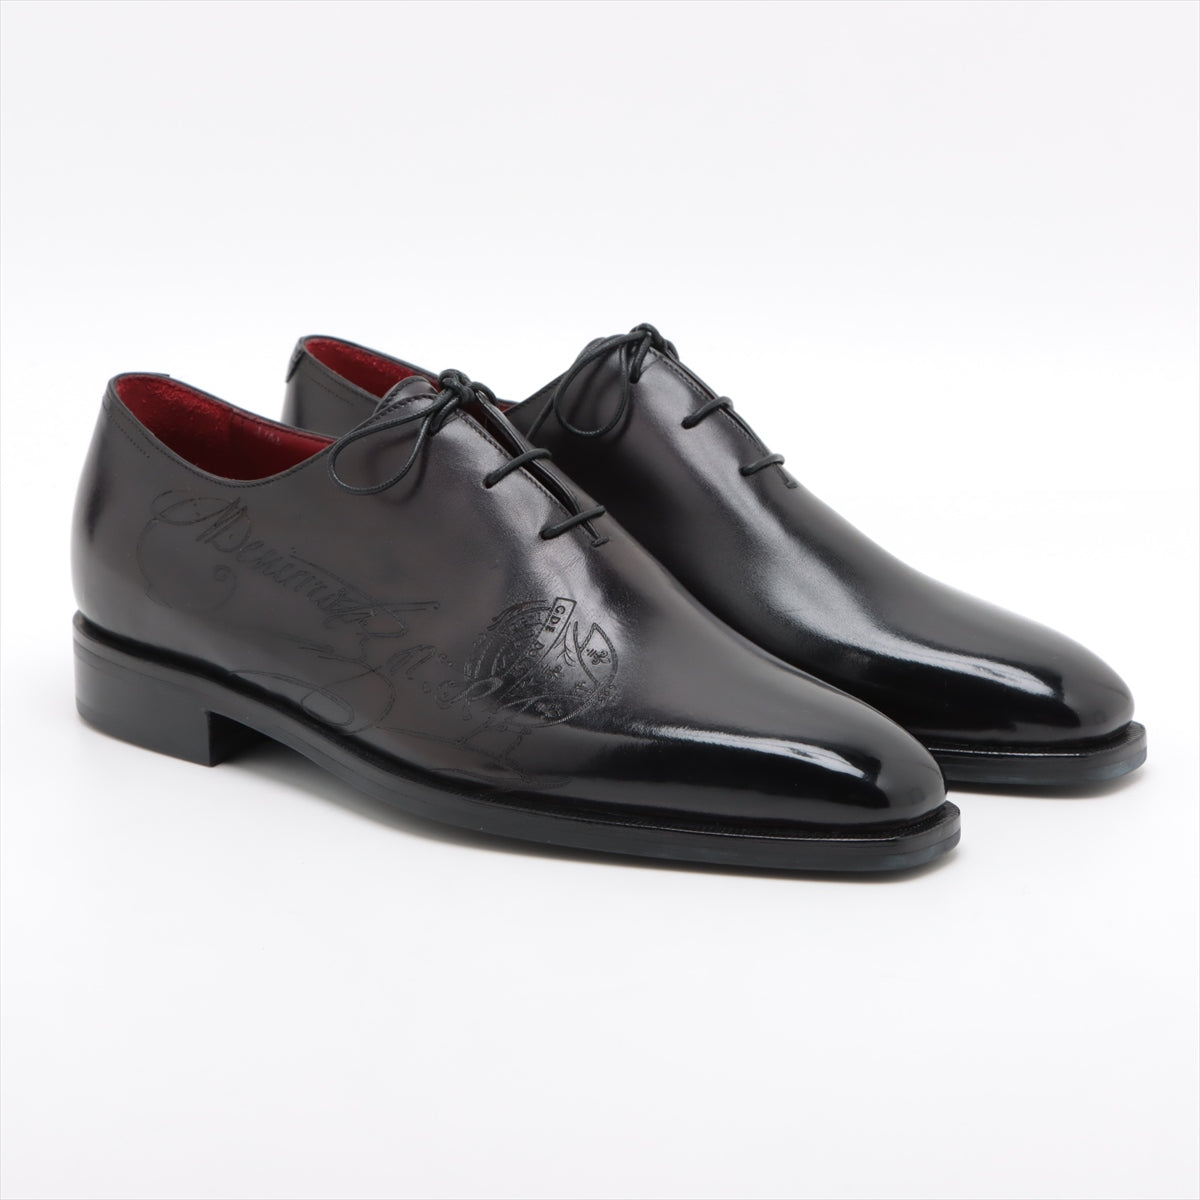 Berluti Alessandro Patent x leather Leather shoes 6 1/2 Men's Black Gare Calligraphy With genuine shoe tree